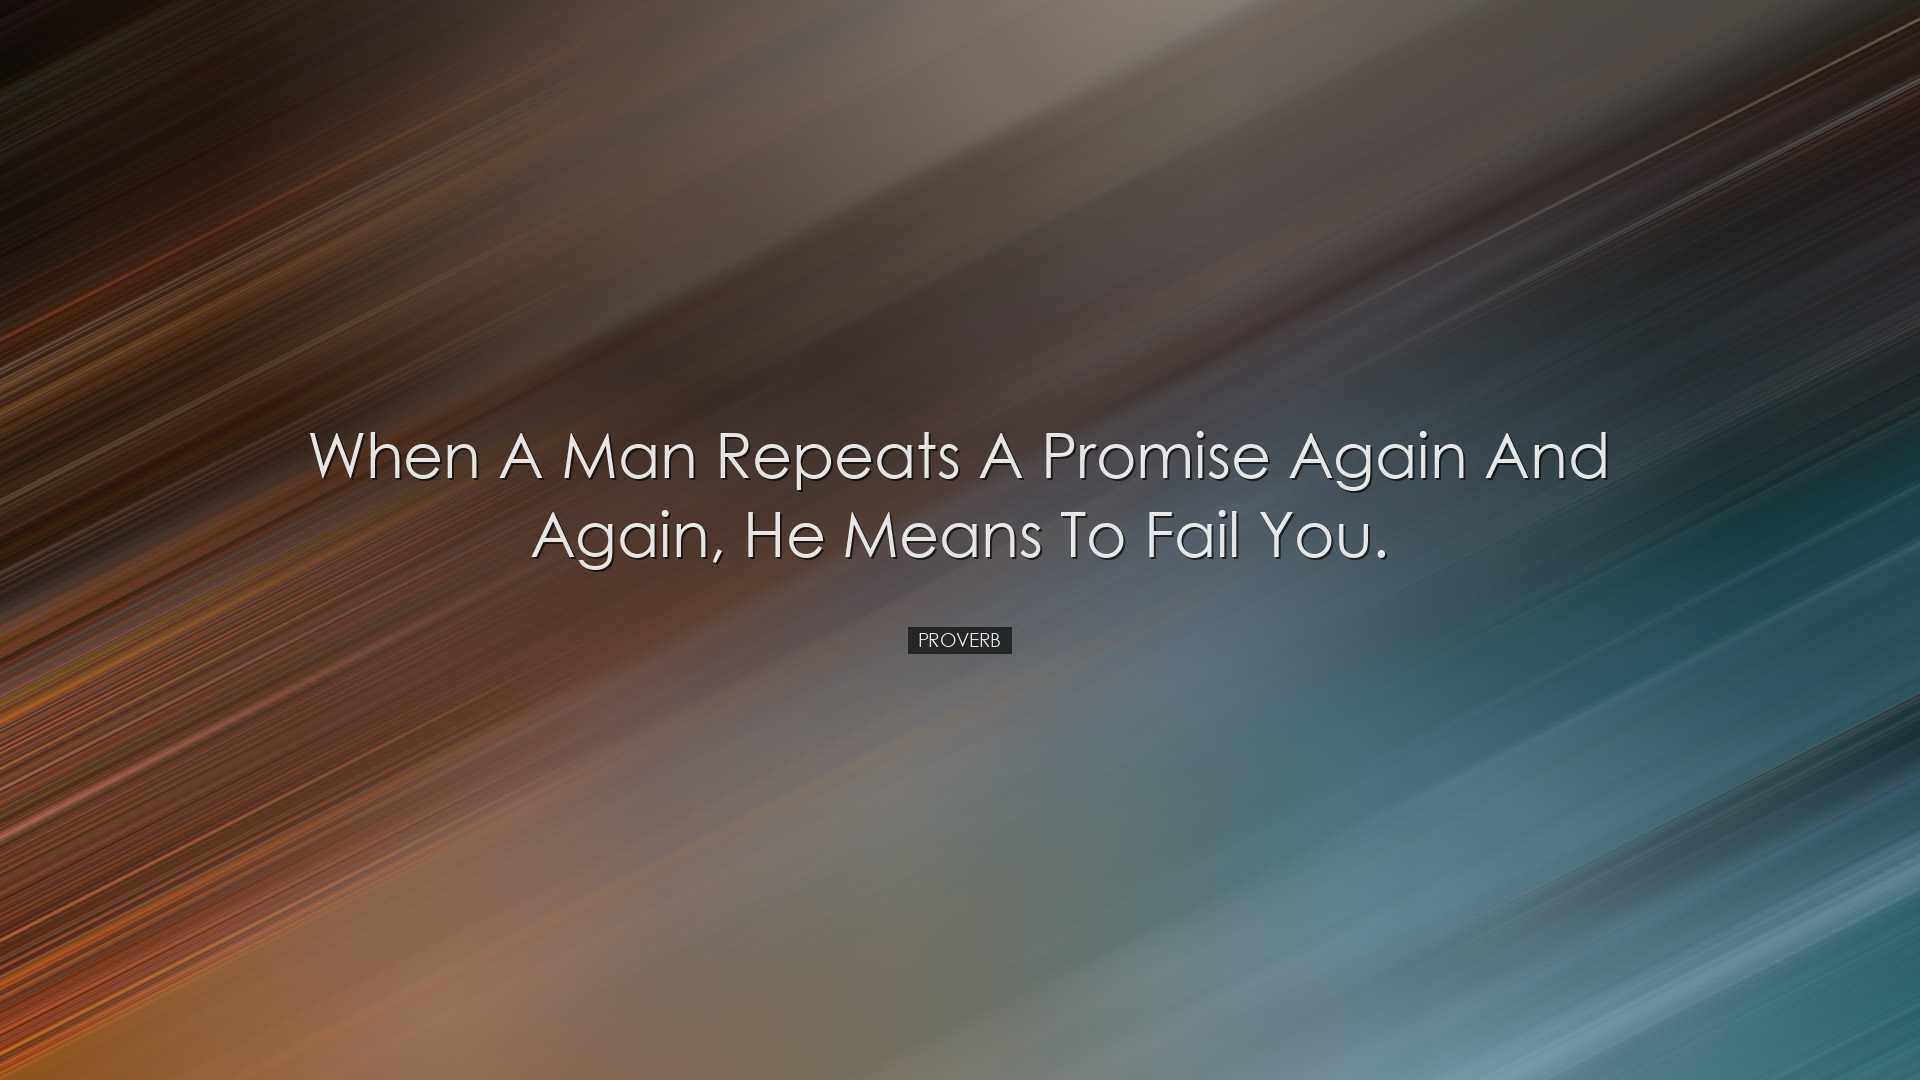 When a man repeats a promise again and again, he means to fail you